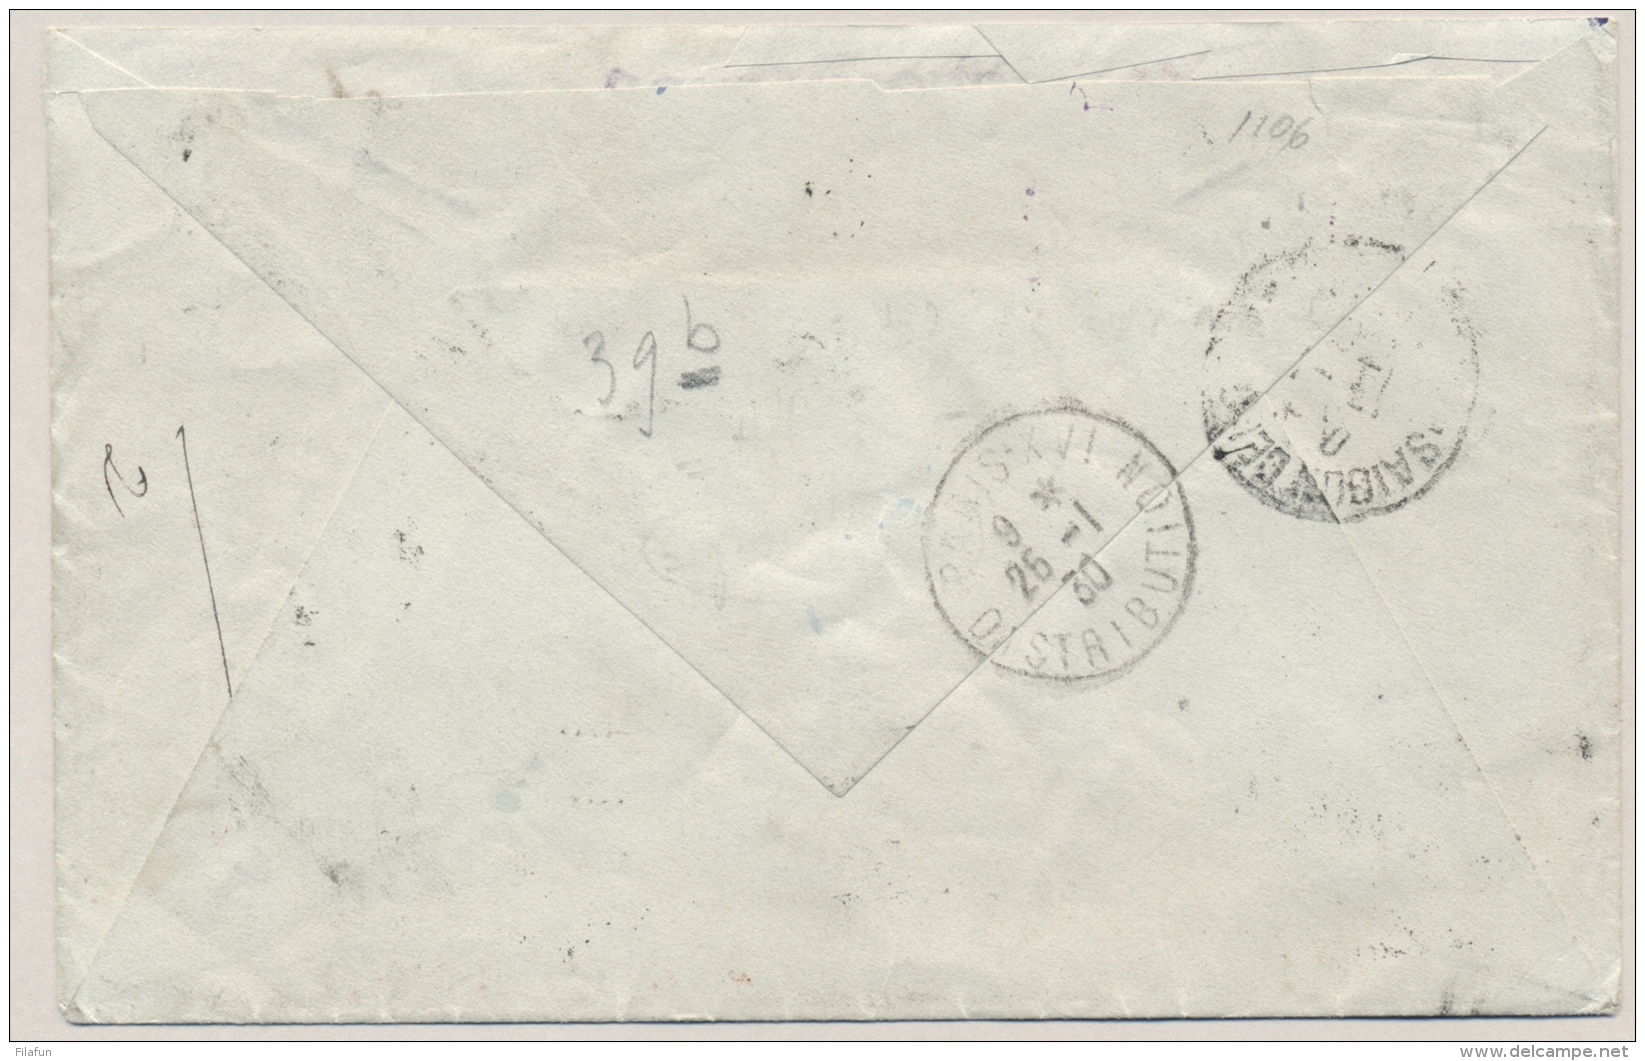 Indochine - 1930 - 4 stamps on R-cover from HaiPhong - Par malle Aerienne Hollandaise - to Paris / France